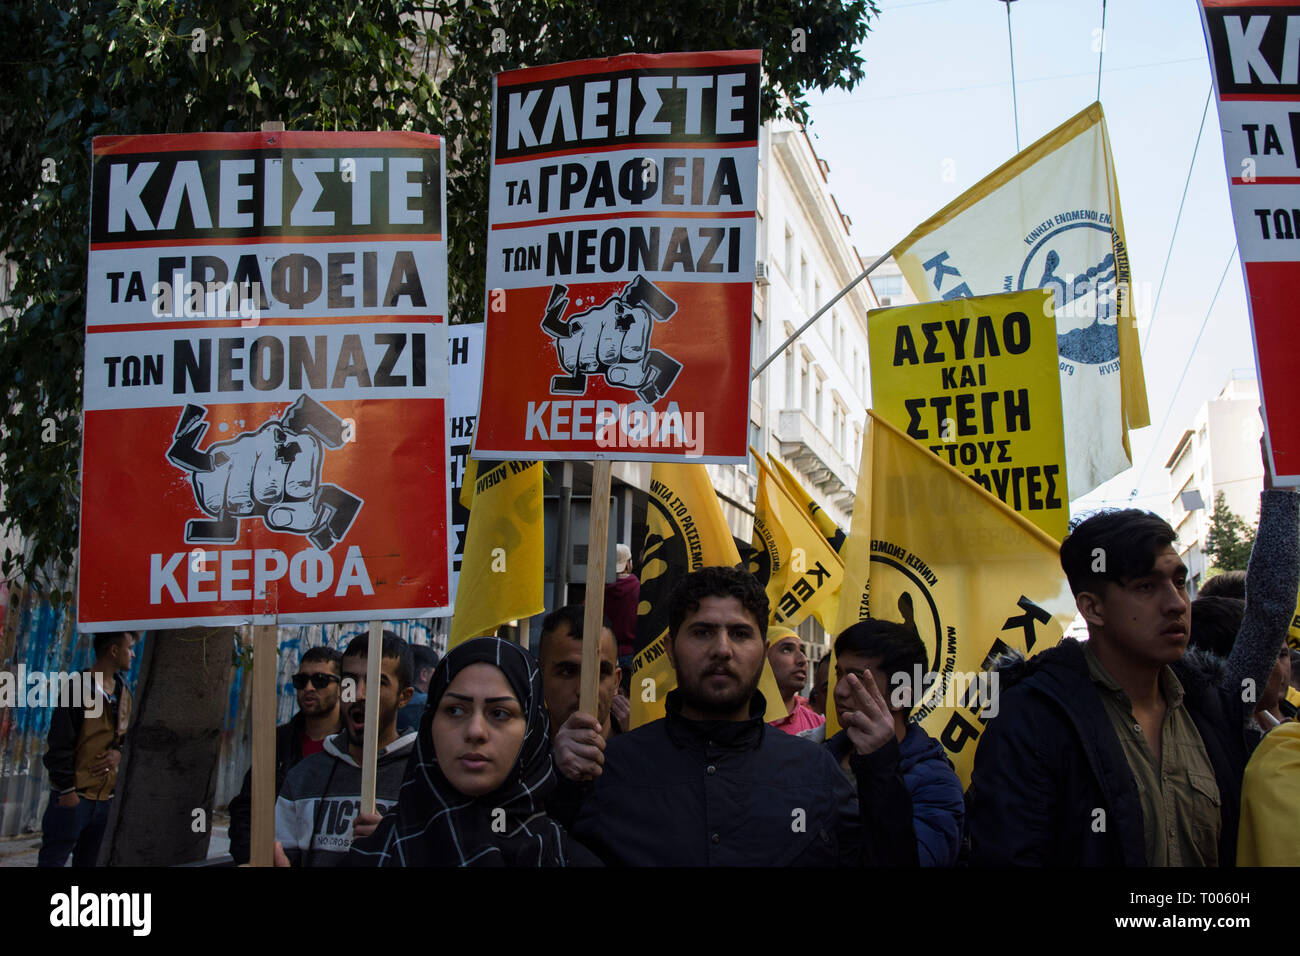 Athens, Greece. 16th March 2019. Migrants and refugees hold placards and shout slogans against racism and closed borders as well as against the greek neo-Nazi party Golden Dawn, currently on trial with accusations such as criminal organization, murder, possession of weapons and racist violence. Leftist and anti-racist organizations staged a rally on the occasion of the International Day against racism to demonstrate against discrimination and racist policies and behaviours. © Nikolas Georgiou / Alamy Live News Stock Photo